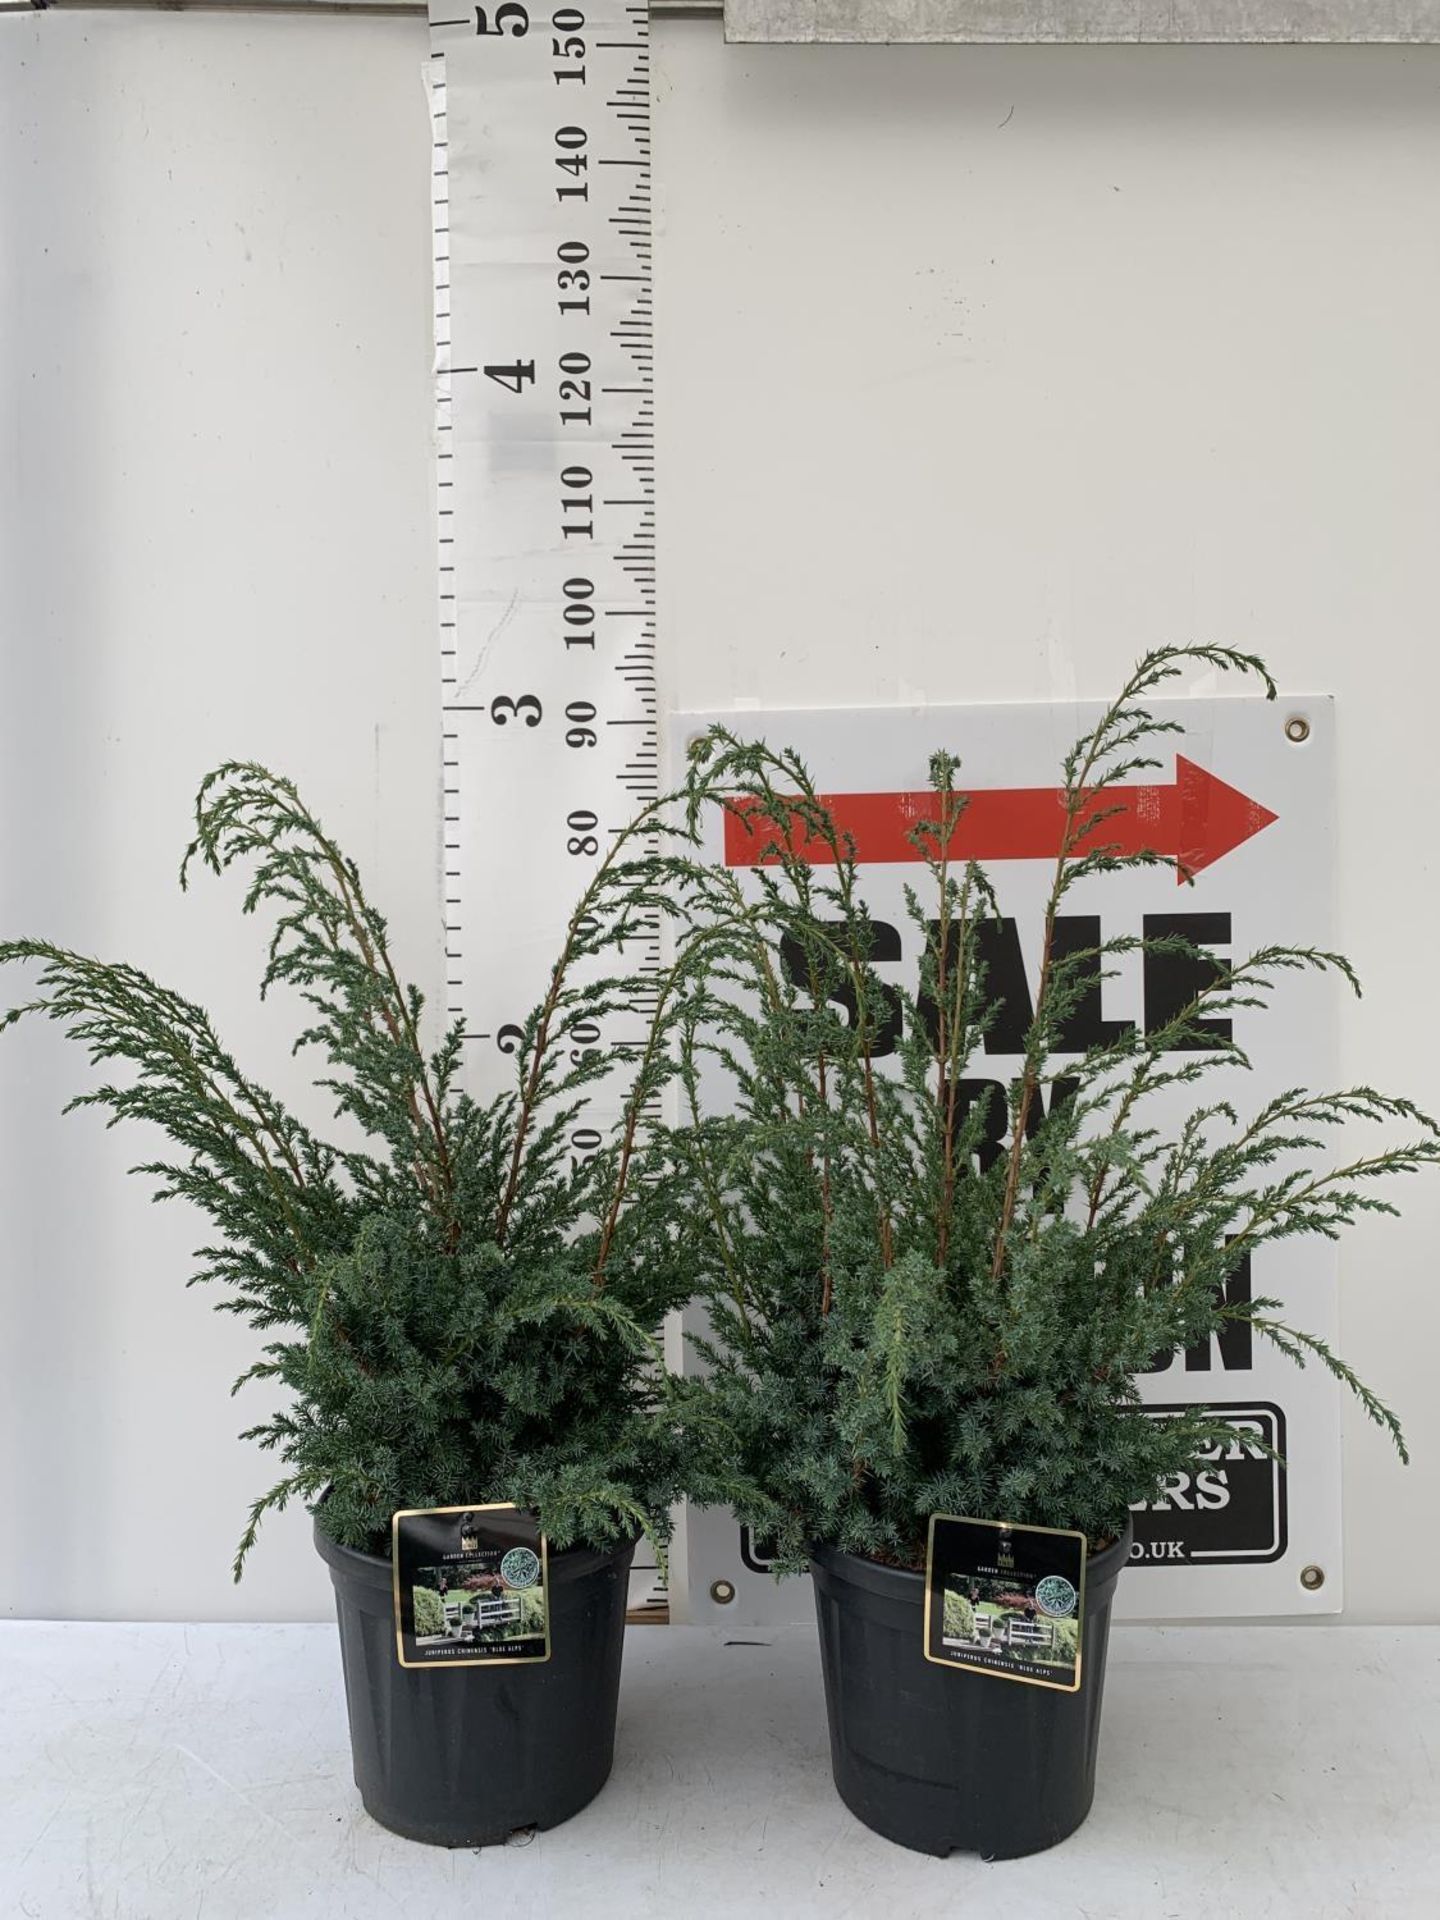 TWO JUNIPERUS CHINENSIS 'BLUE ALPS' IN 7 LTR POTS APPROX 1 METRE IN HEIGHT PLUS VAT TO BE SOLD FOR